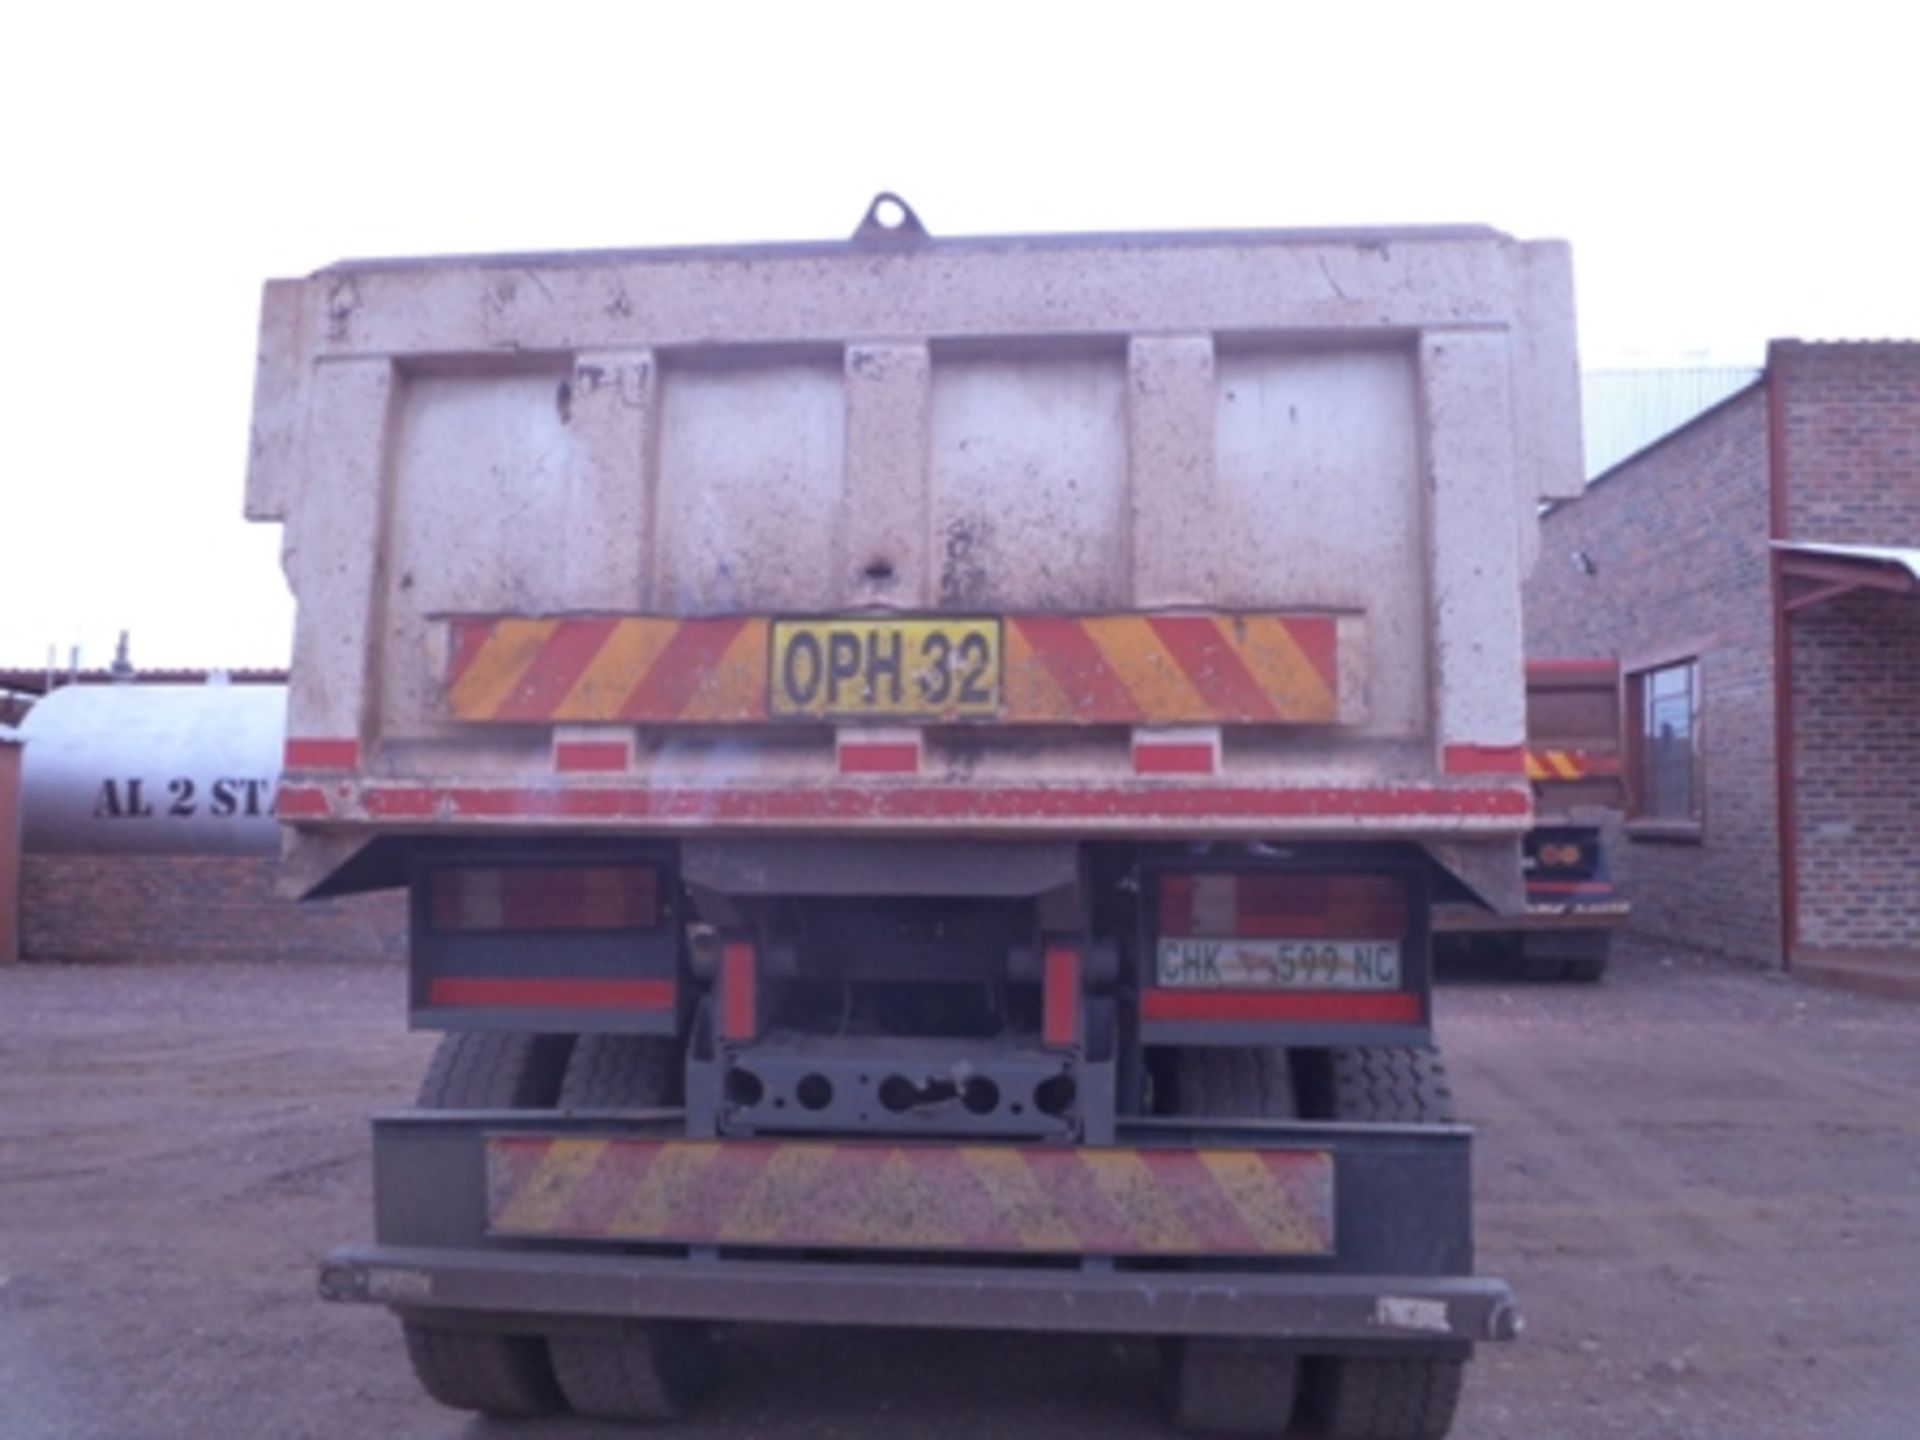 2003 MERCEDES BENZ ACTROS 3335 10M³ TIPPER TRUCK  KM 345362(23 ASBES STR, KATHU  NORTHERN CAPE) - Image 8 of 9